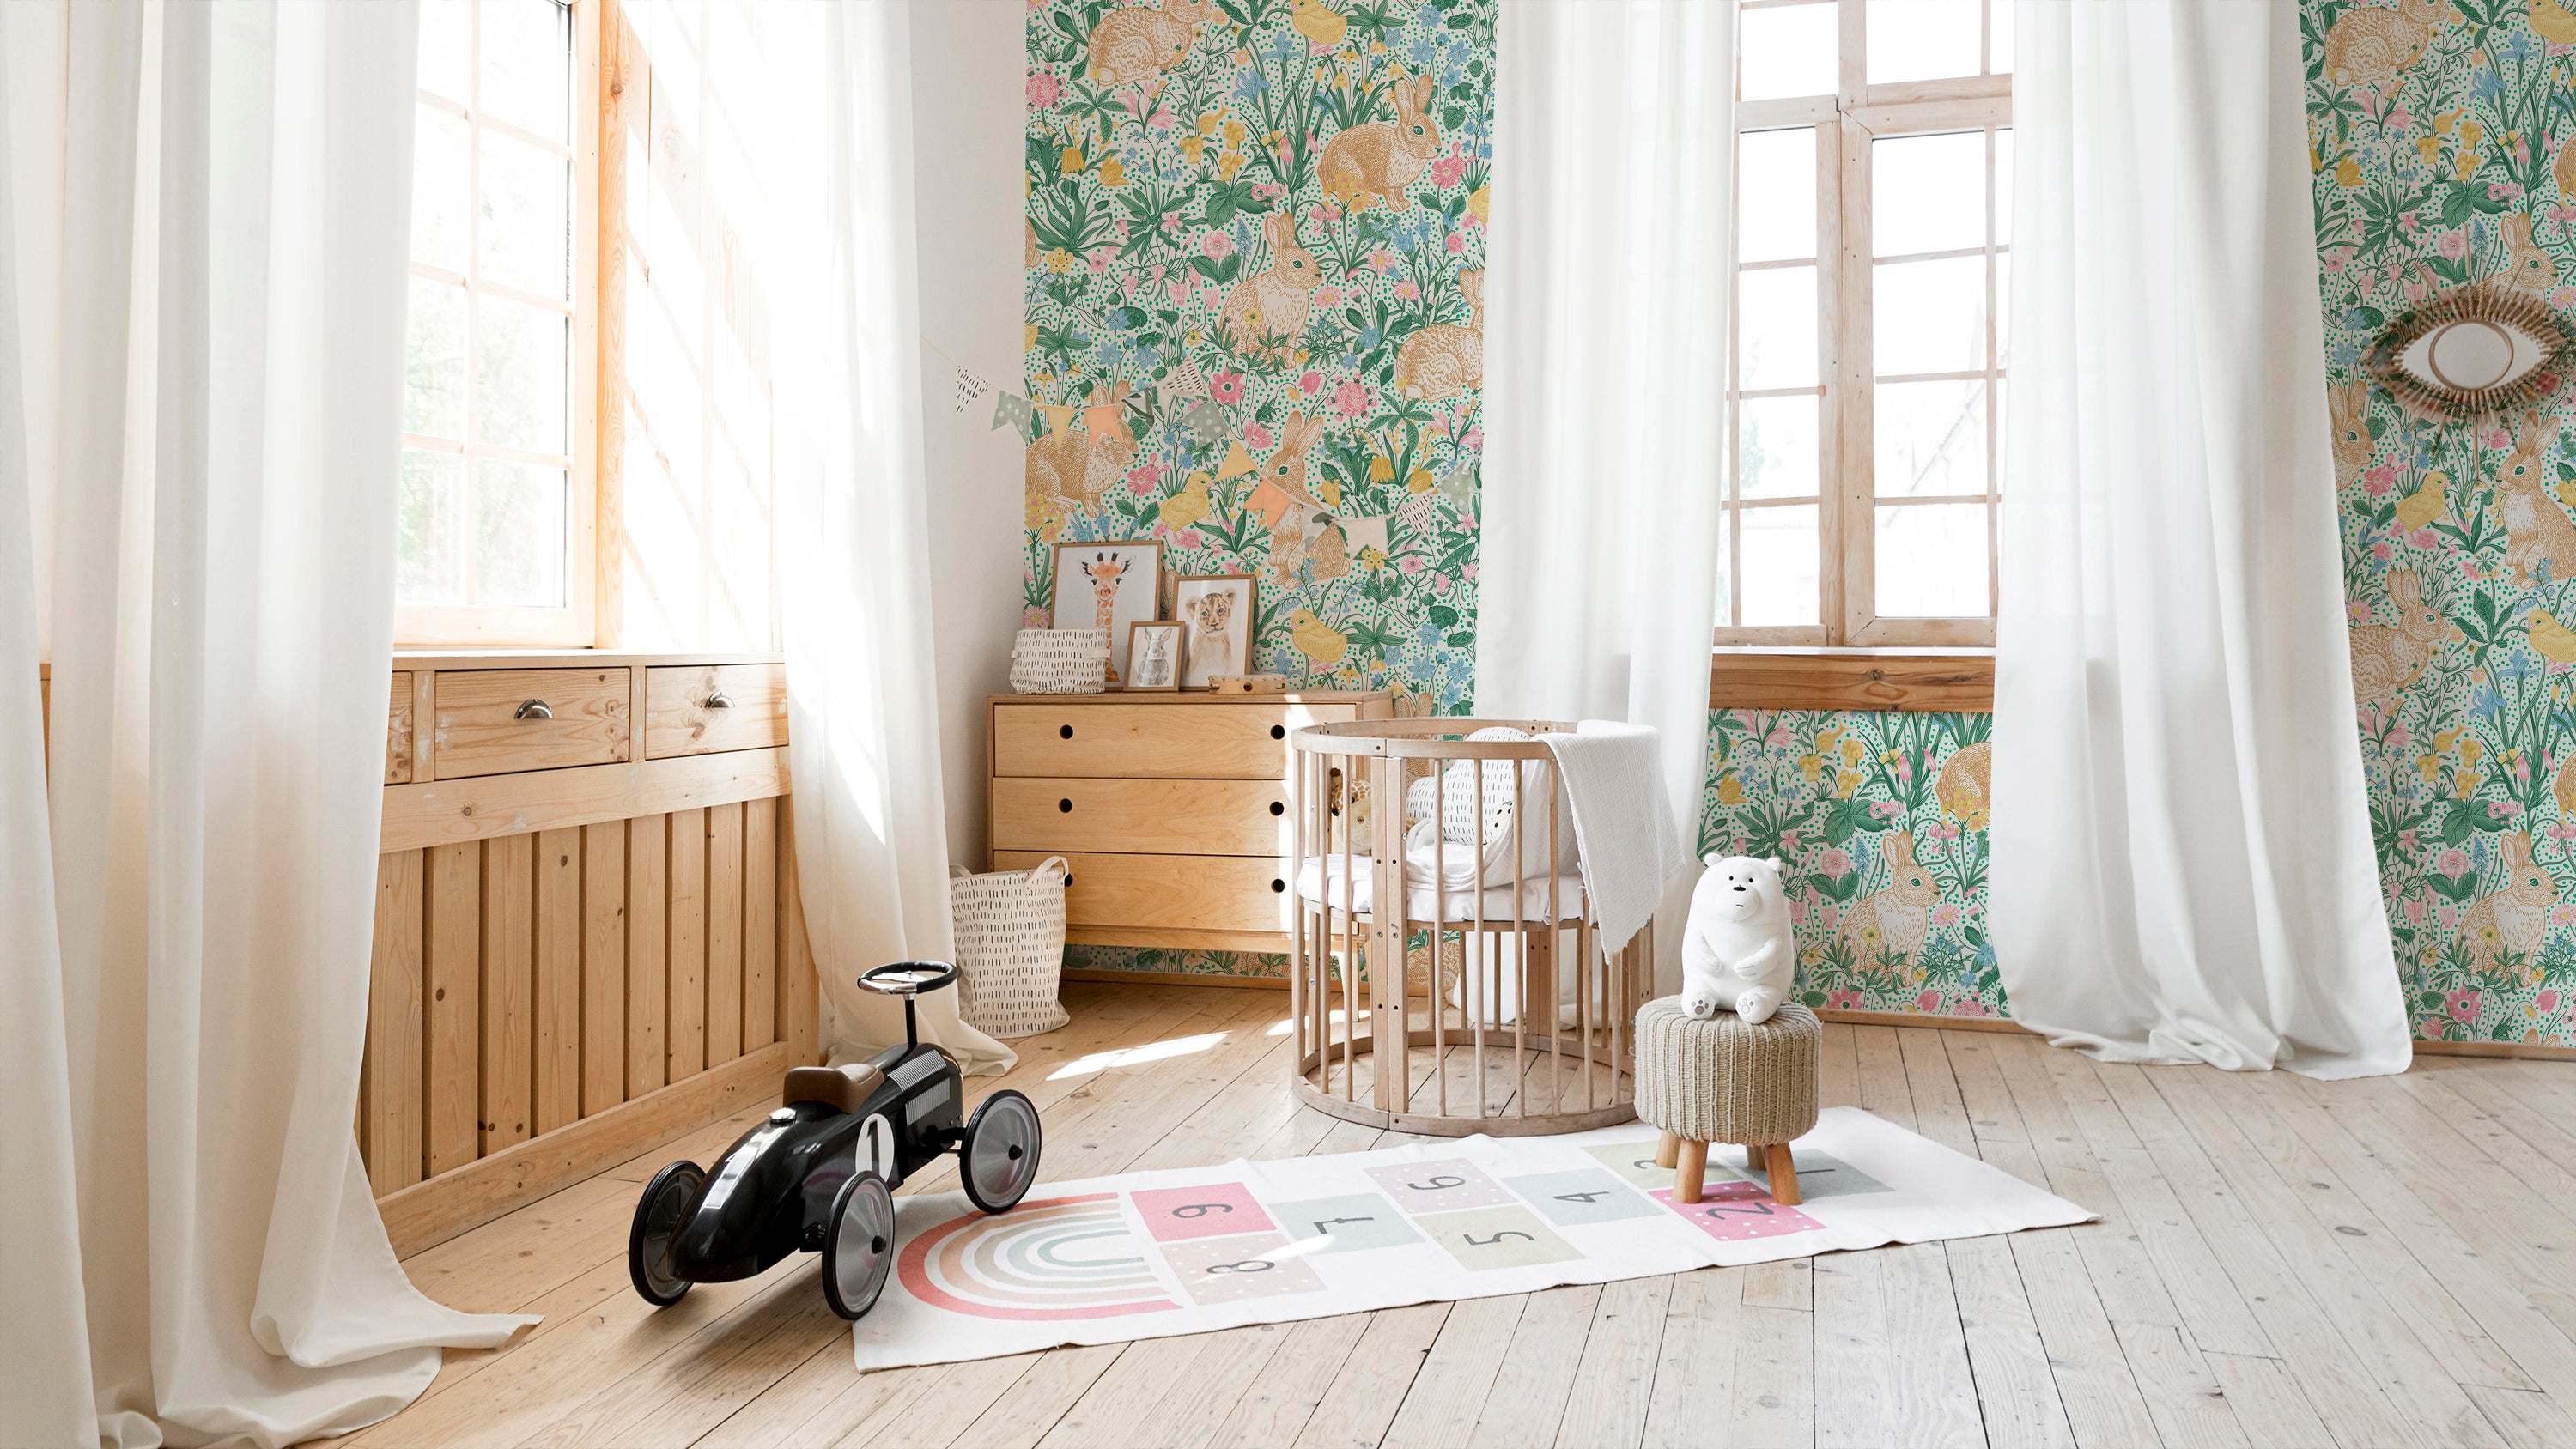 "Bright and airy children's room featuring a colorful floral wallpaper with rabbits, birds, and a variety of flowers. The room includes wooden furniture, a circular crib, and playful decor items like a small ride-on car and a hopscotch rug.